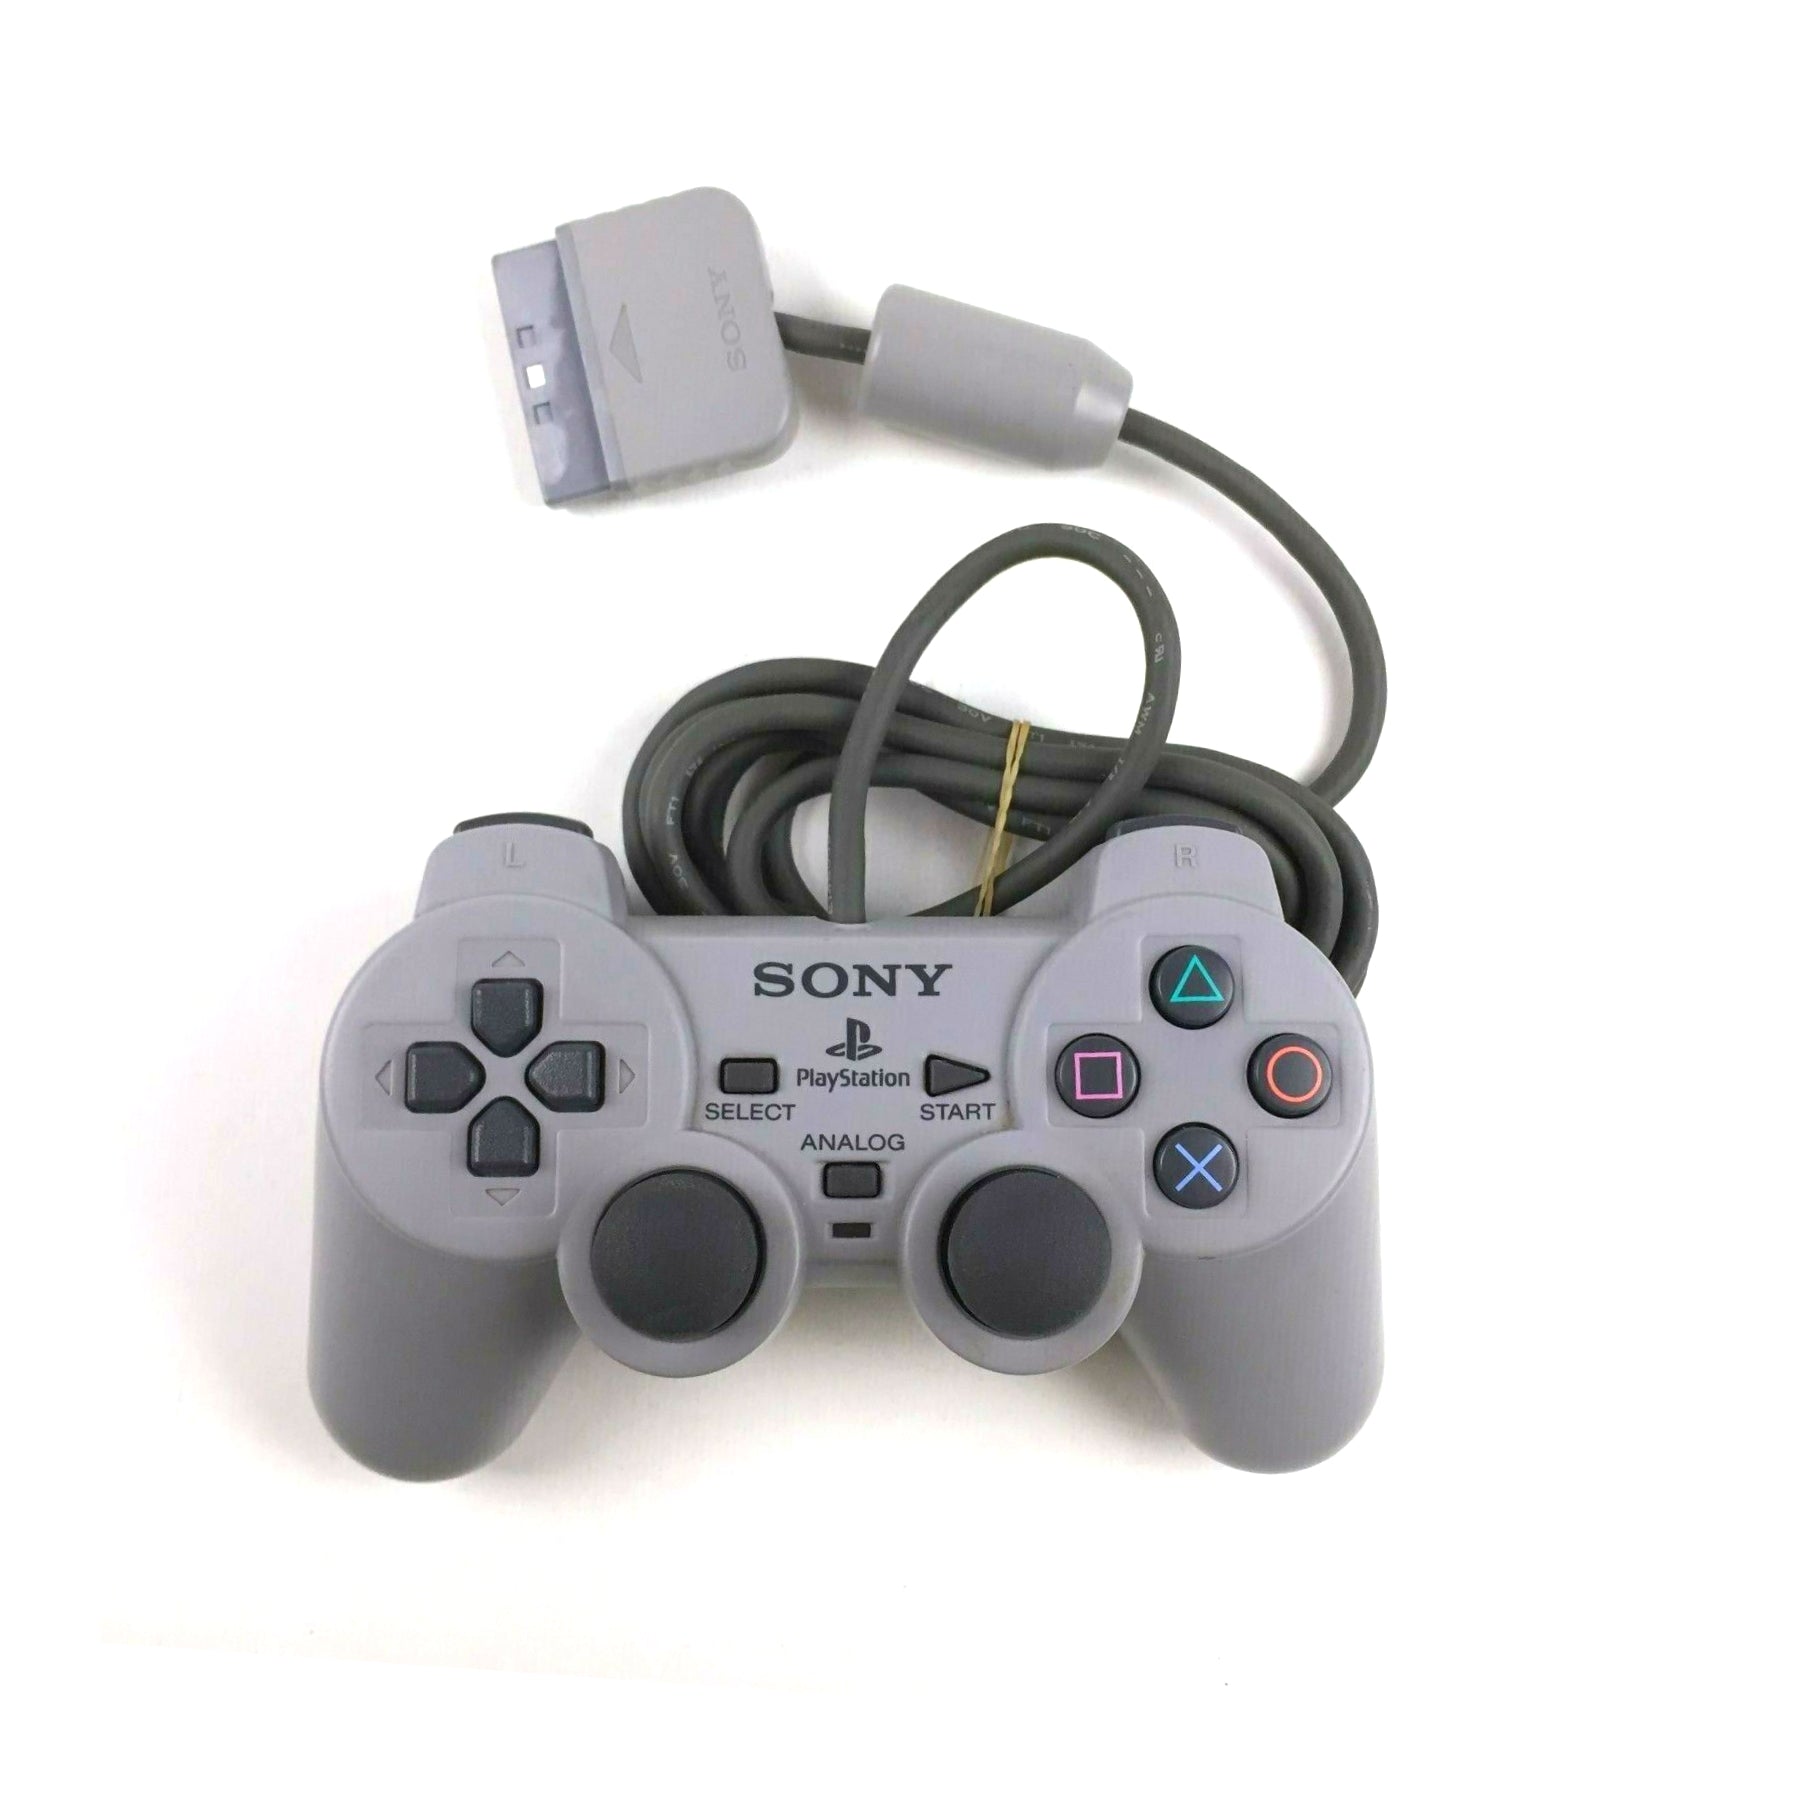 Sony PlayStation 1 DualShock Analog Controller - Gray - YourGamingShop.com - Buy, Sell, Trade Video Games Online. 120 Day Warranty. Satisfaction Guaranteed.